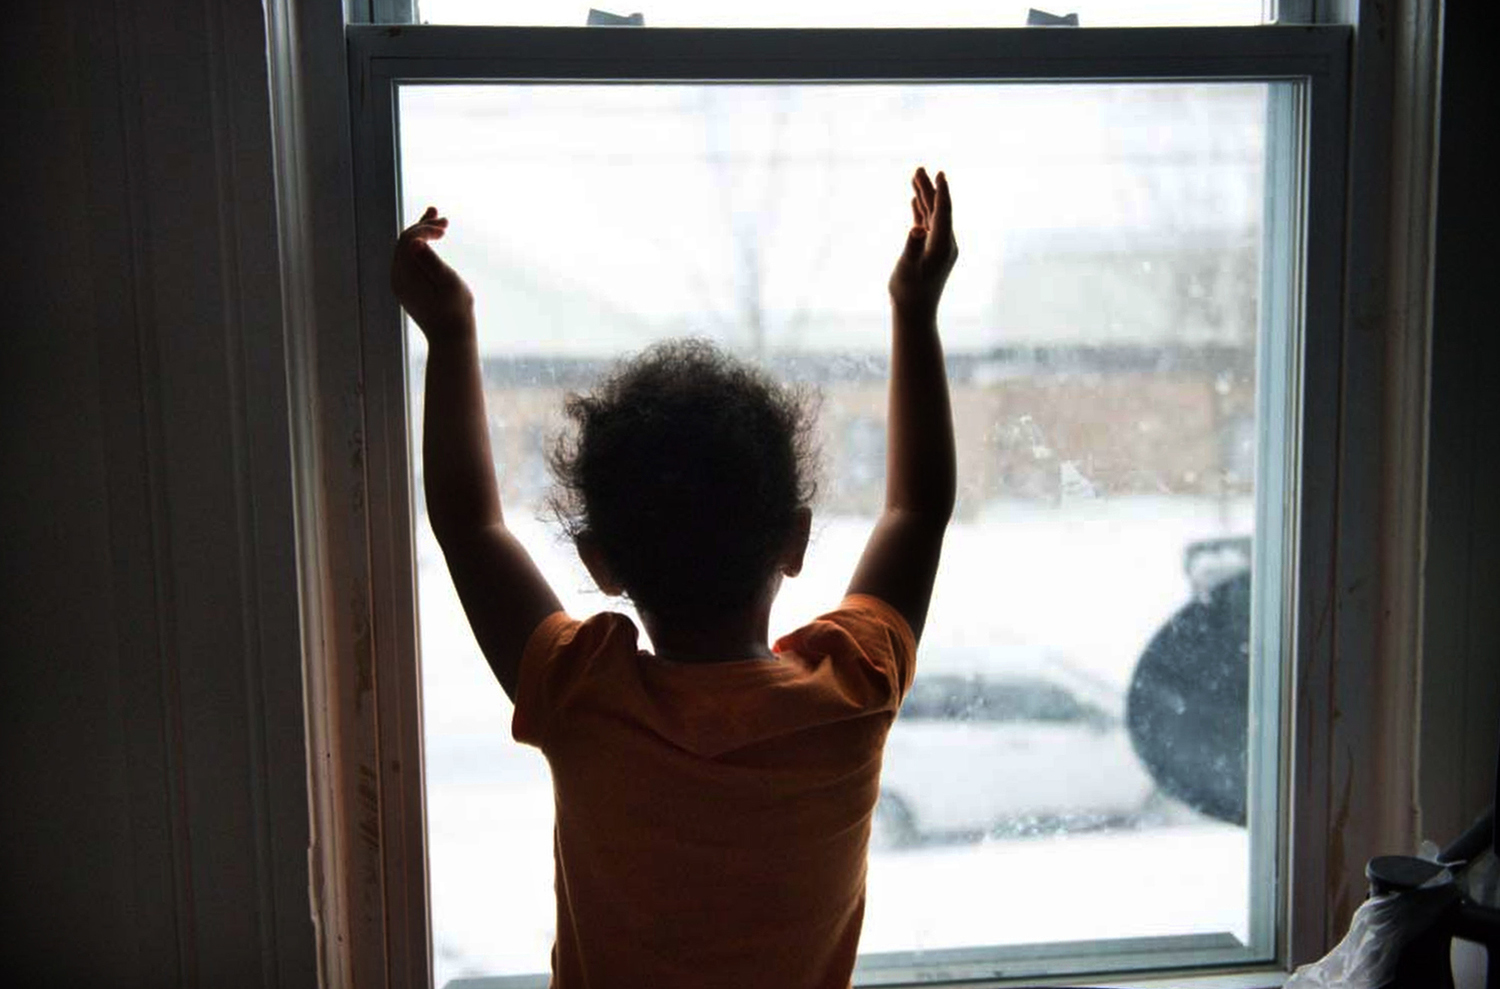  Lydianyz Huertas, 5, daughter of Lydia Huertas,&nbsp;watches snow fall from her bedroom window in Syracuse.&nbsp; 